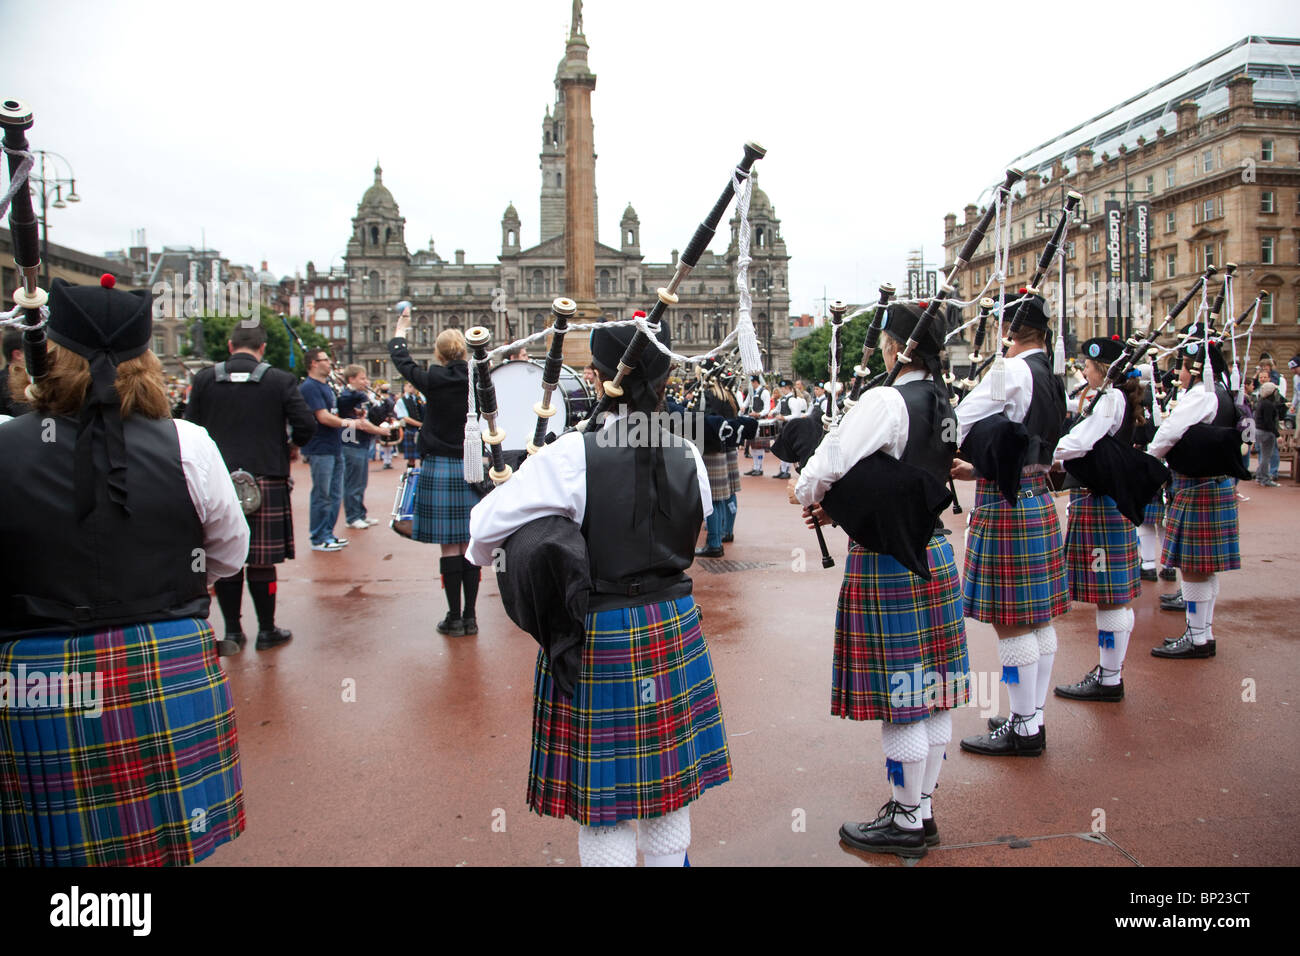 Hawkesbury Nepean Valley Pipe Band perform at George Square Glasgow International Piping Festival, Scotland.Photo:Jeff Gilbert Stock Photo